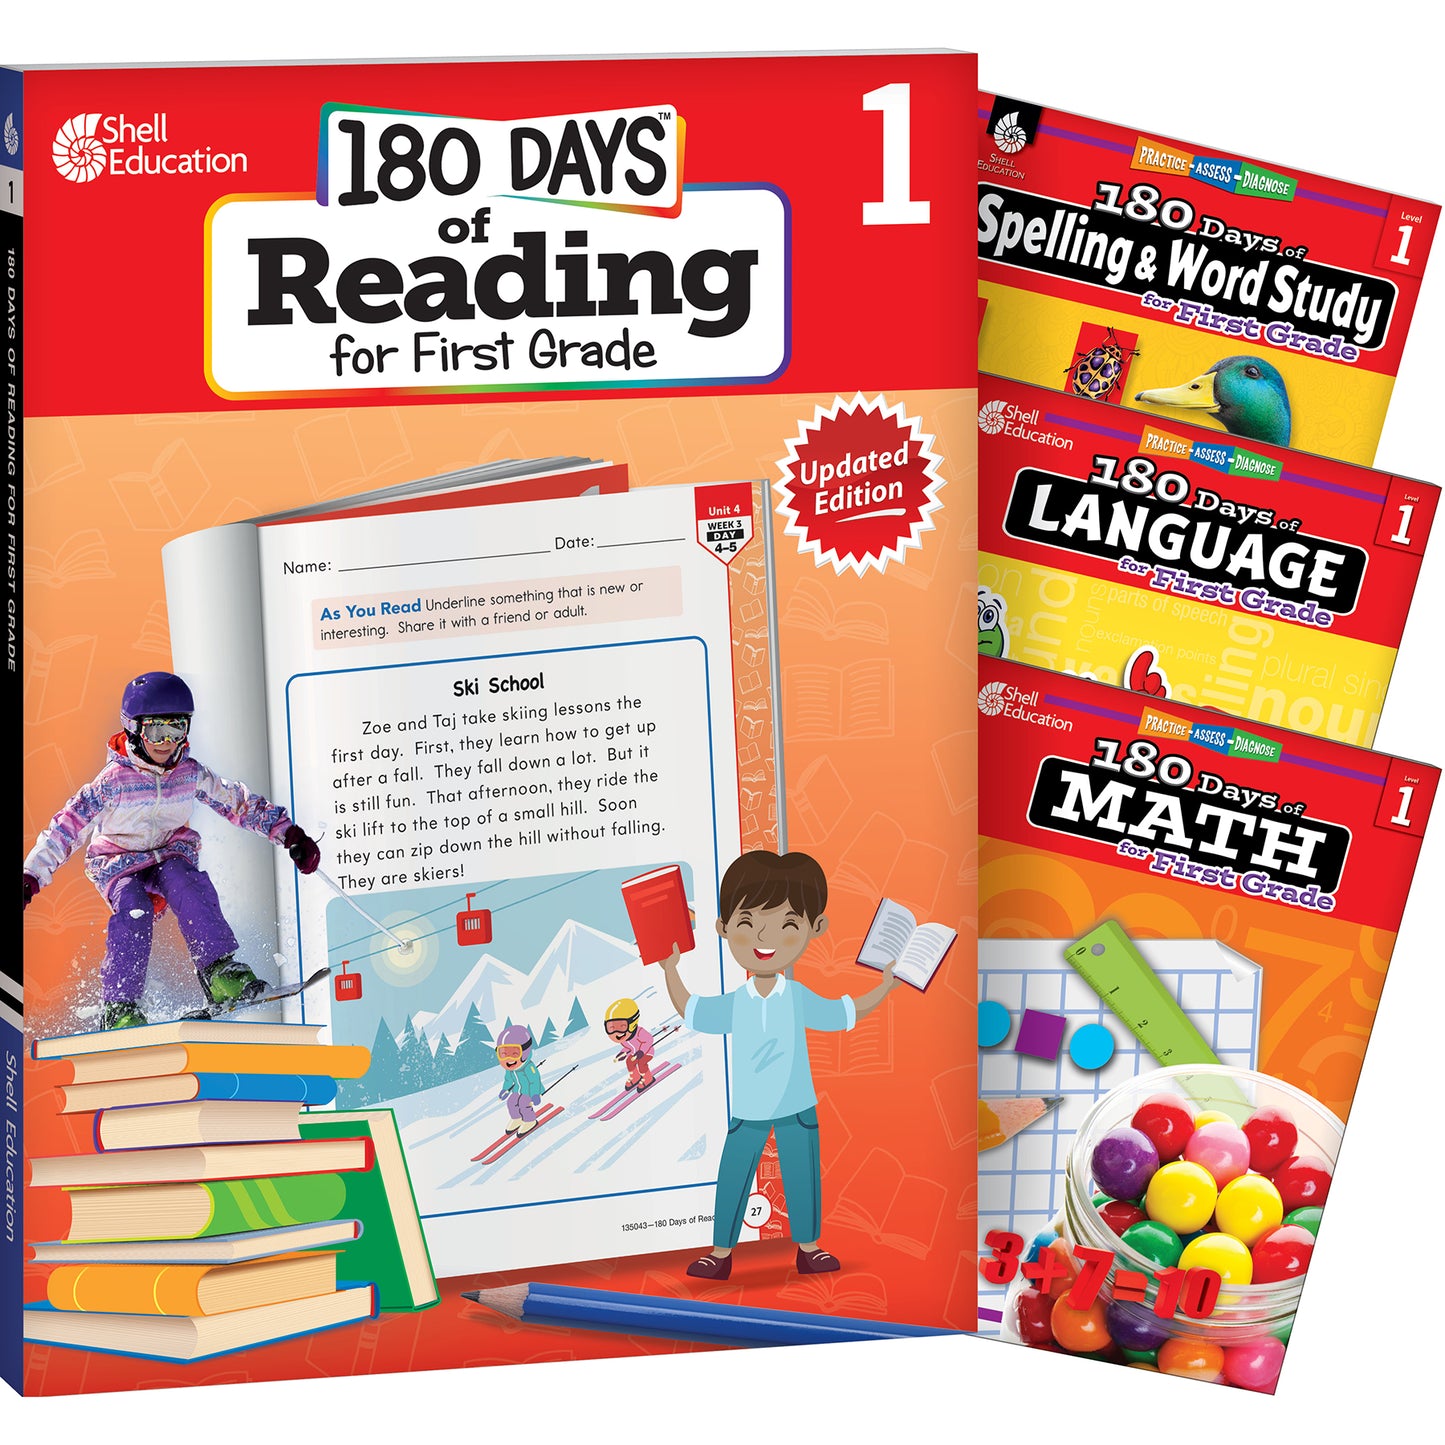 180 Days of Practice Reading, Spelling, Language, & Math for First Grade: 4-Book Set